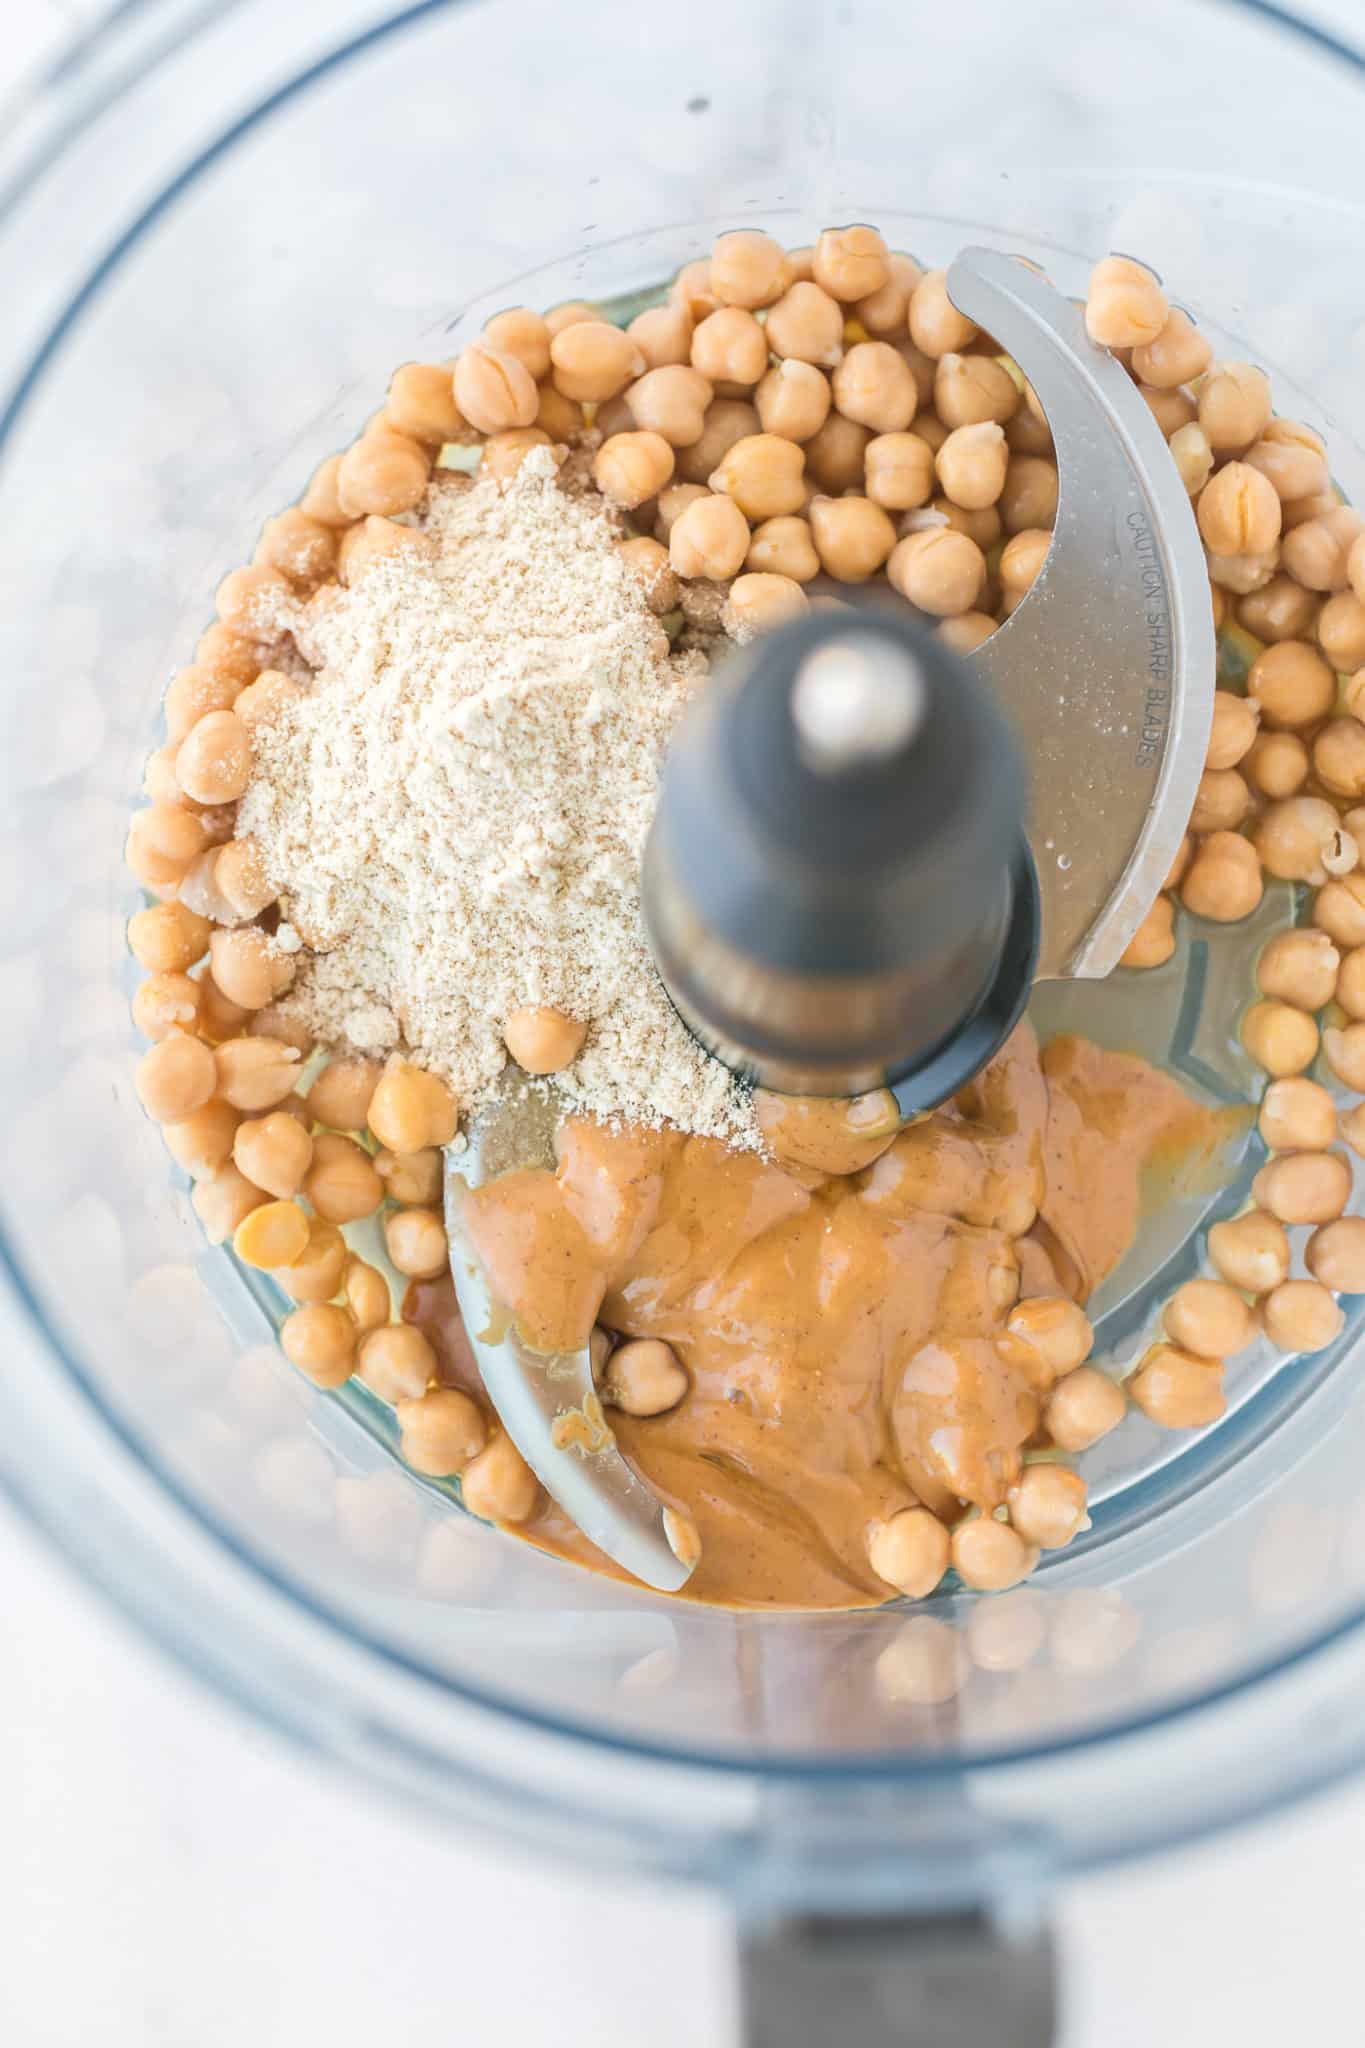 ingredients for chickpea cookie dough in a food processor.